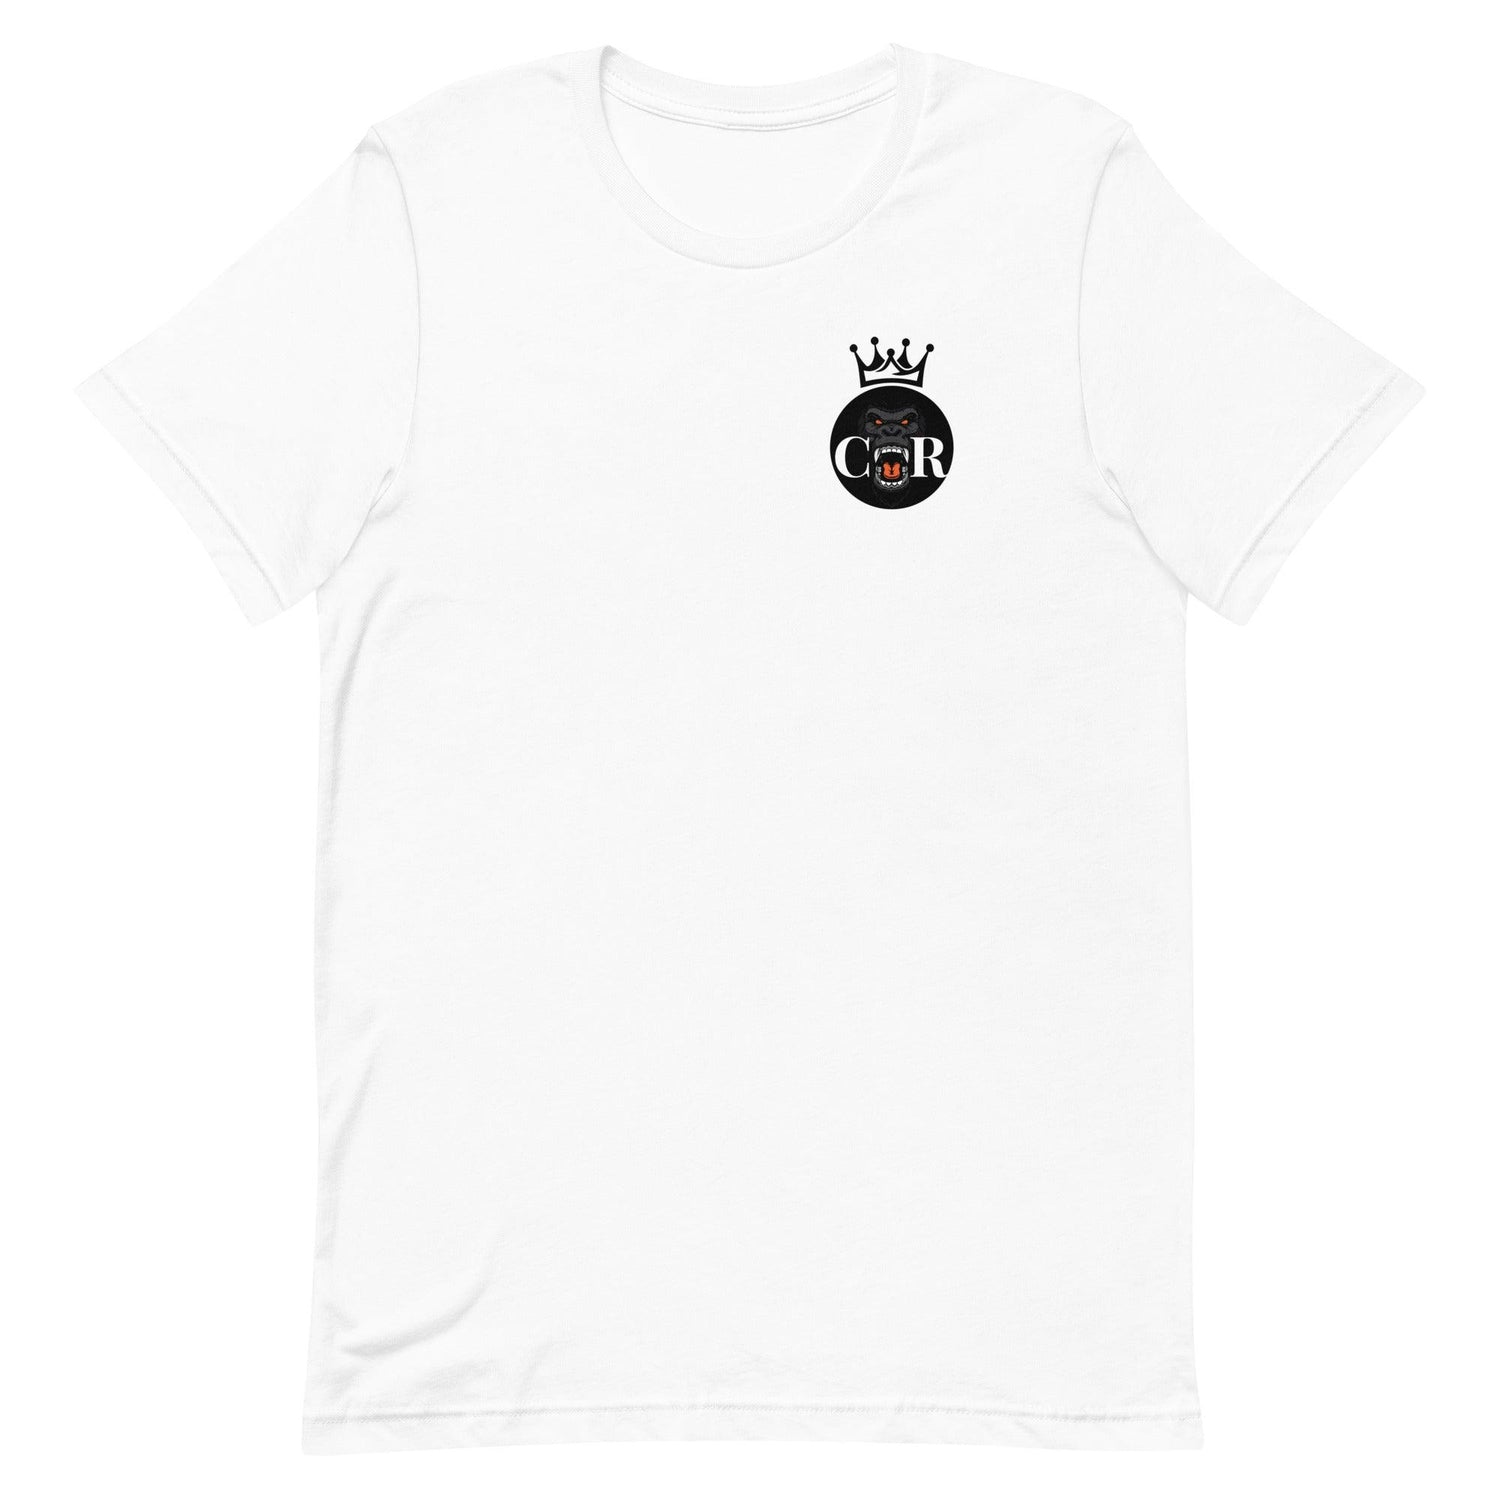 Chris Royster "Crowned" t-shirt - Fan Arch